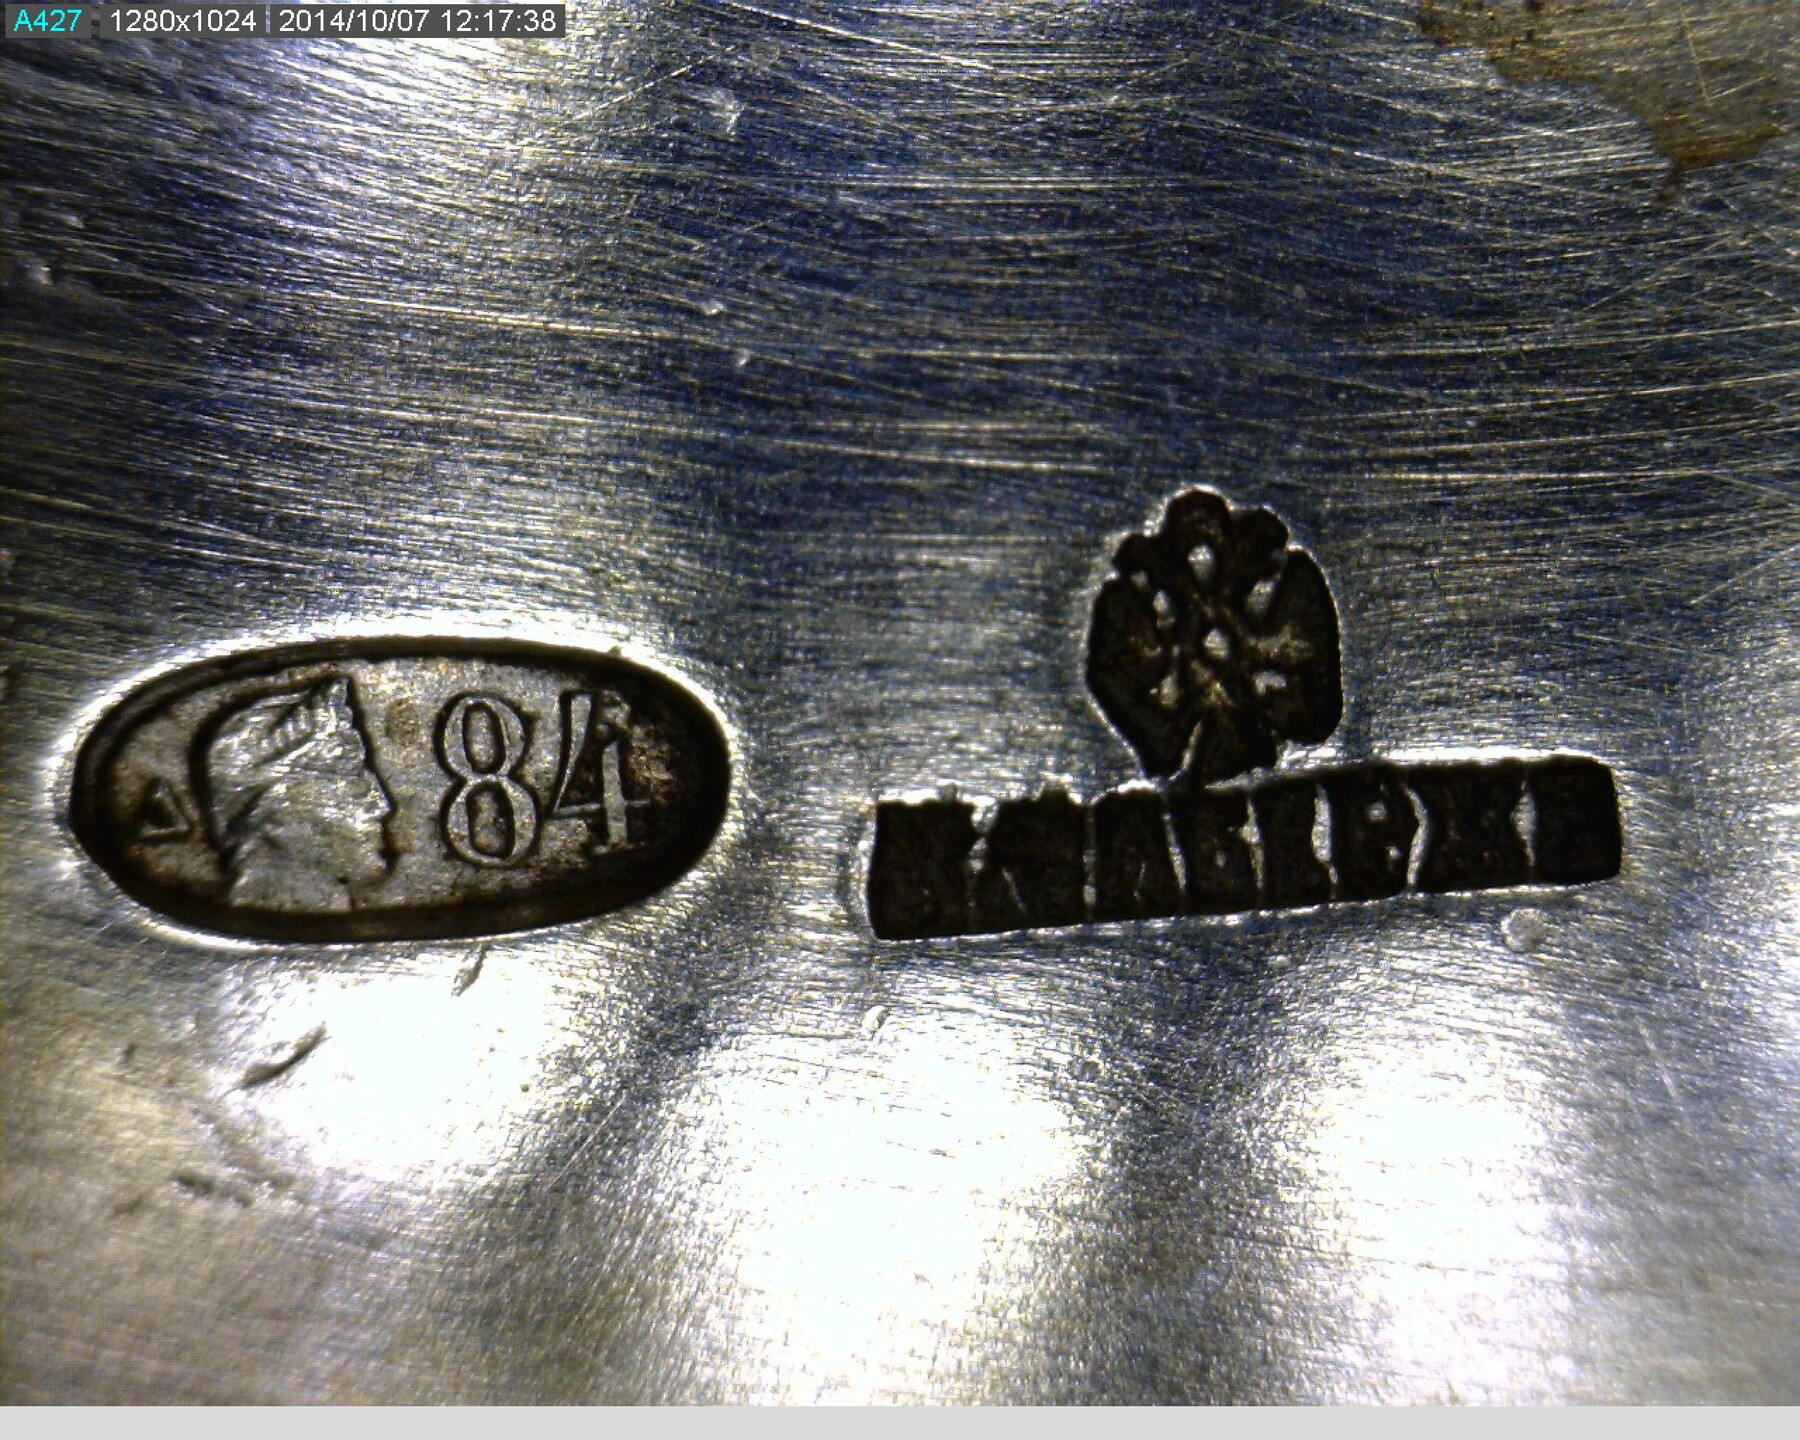 MARK OF FABERGÉ IN CYRILLIC BENEATH THE IMPERIAL WARRANT, MOSCOW, 1908–1913, 84 STANDARD